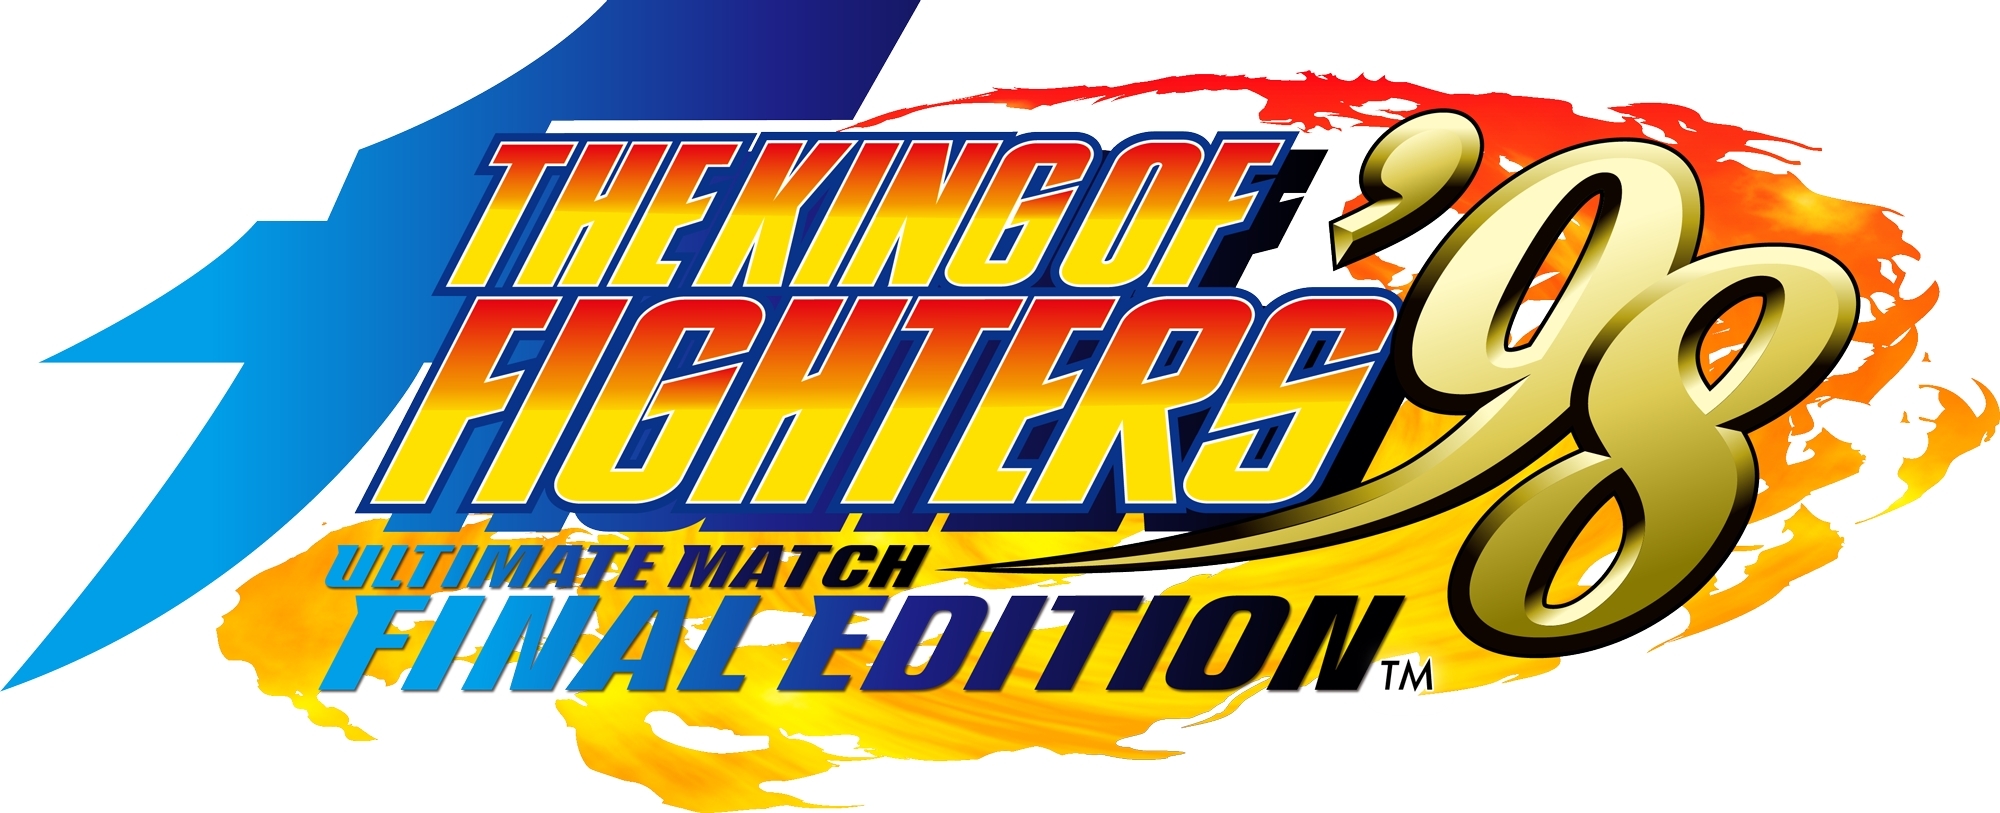 Logo The King Of Fighters 98, sty fx